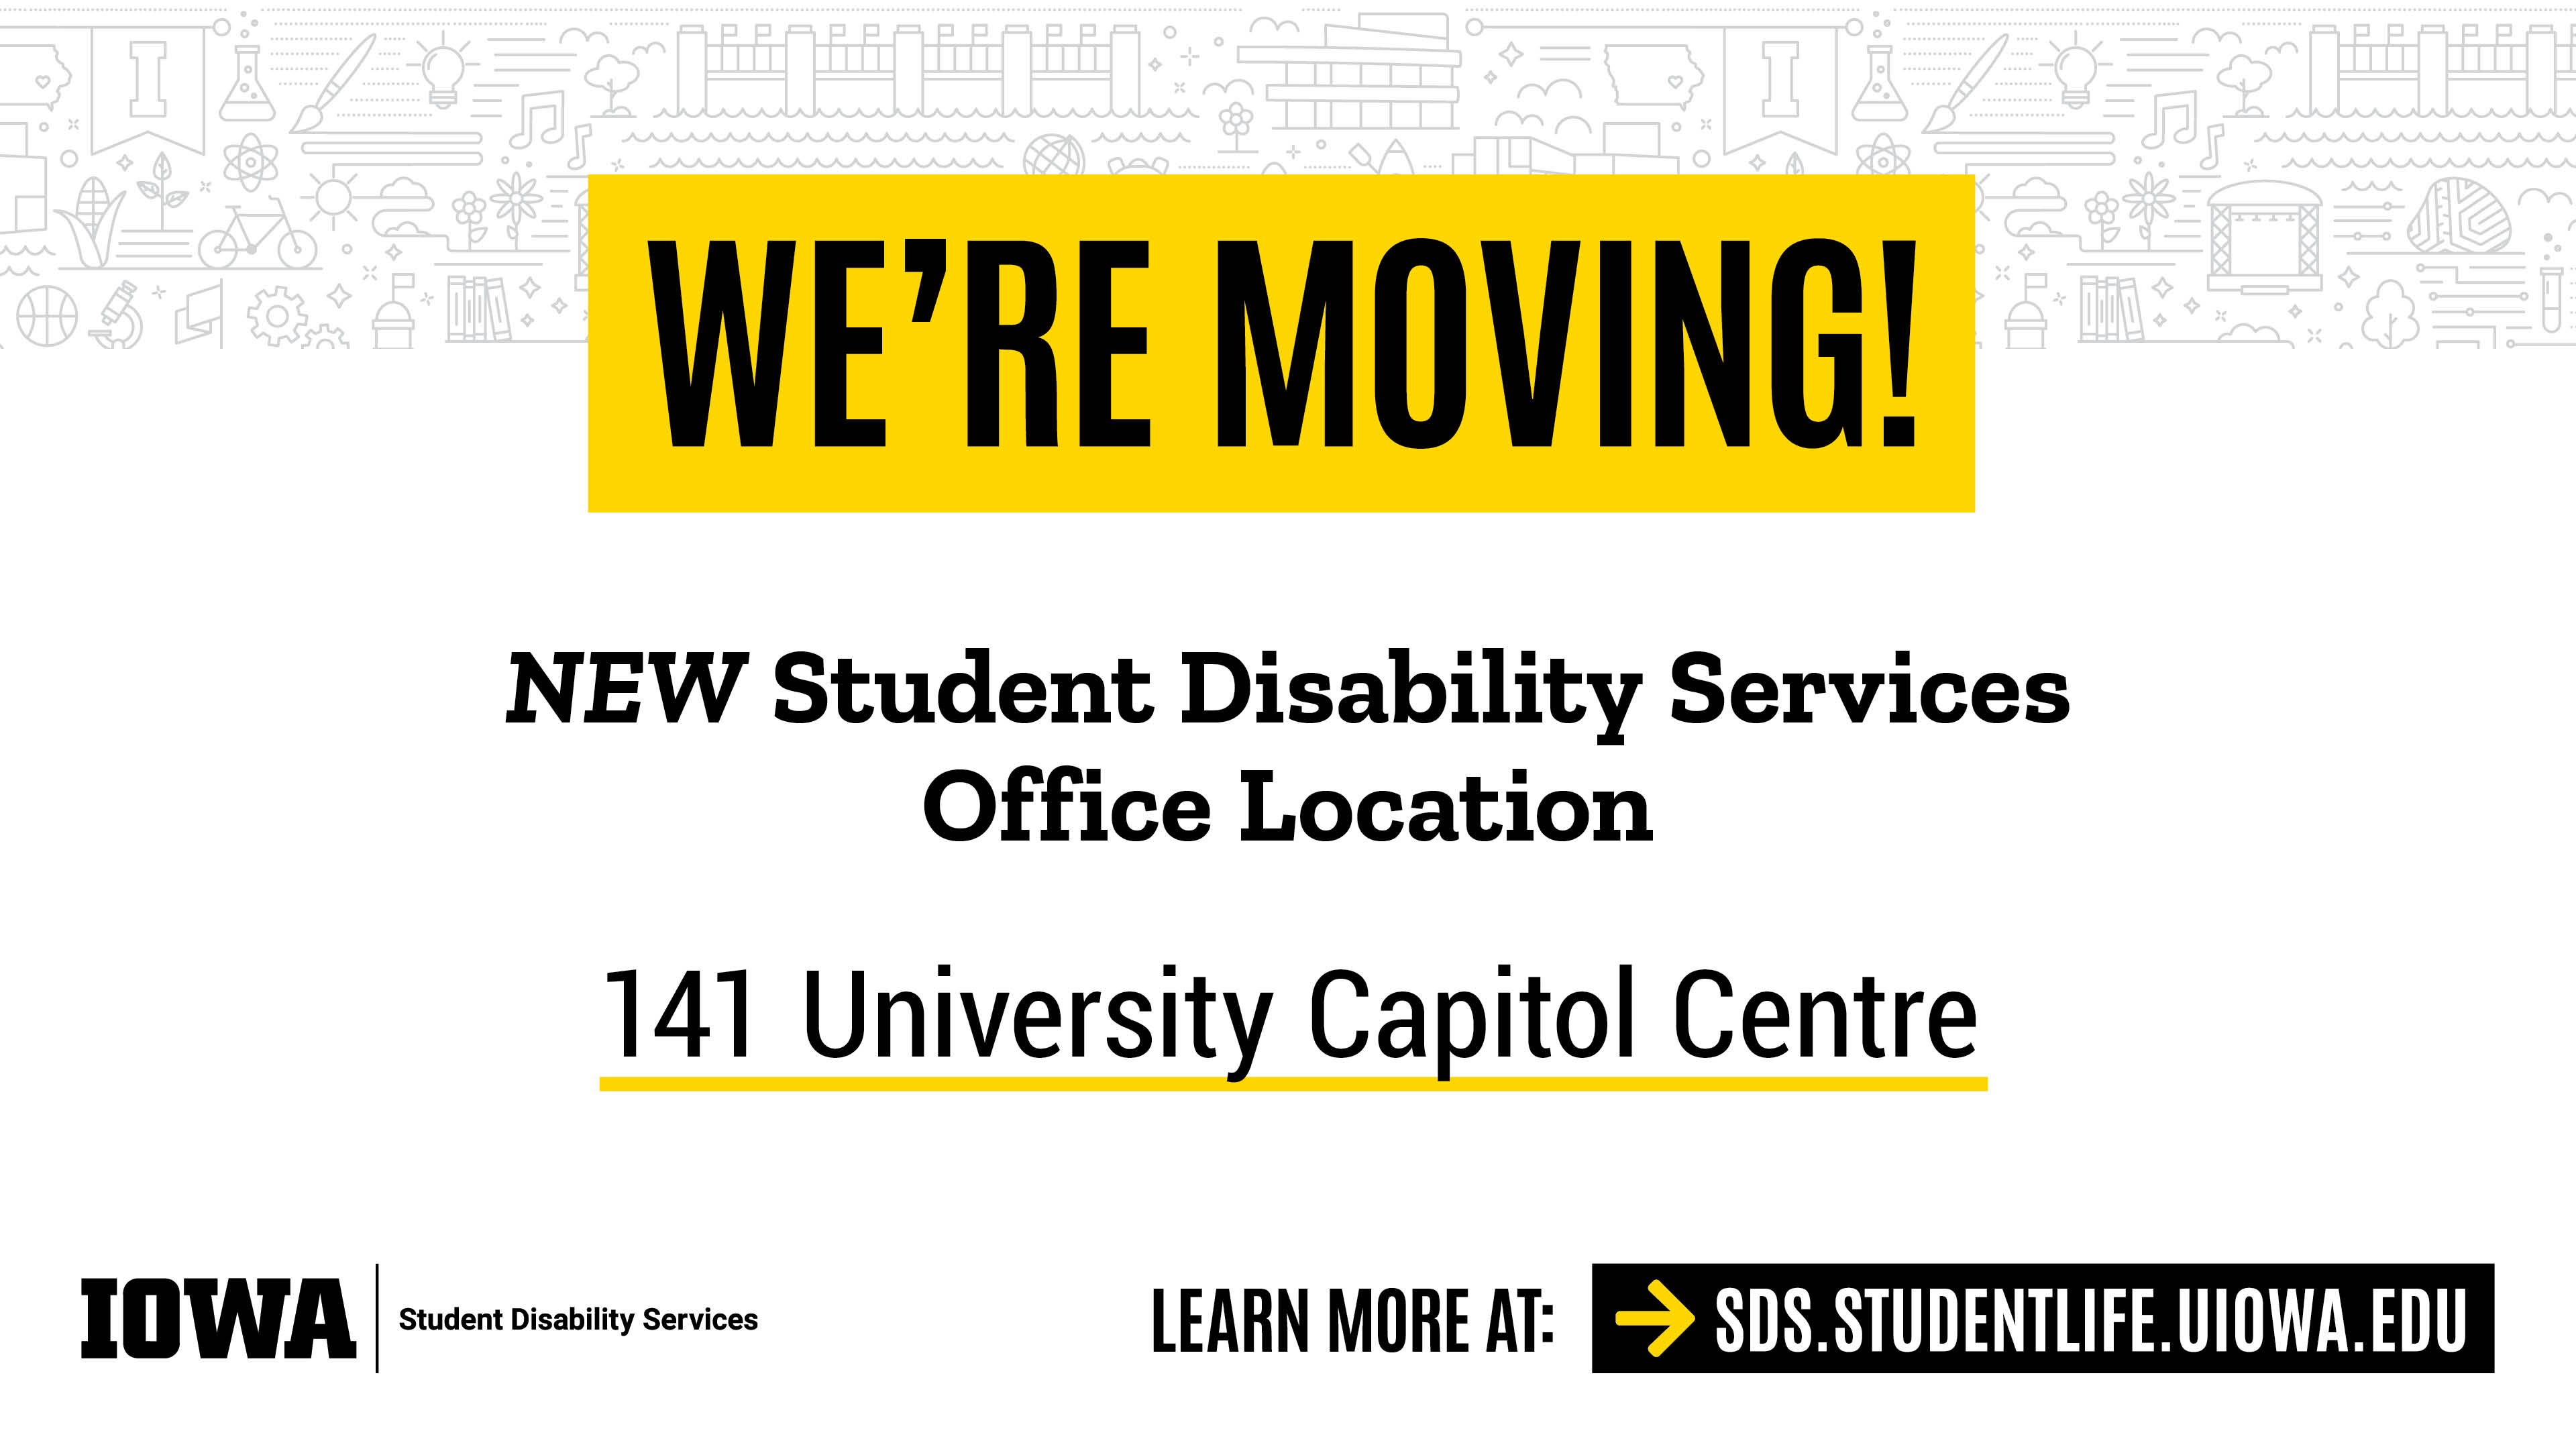 We're moving! NEW Student Disability Services Office Location. 141 University Capitol Centre. IOWA | Student Disability Services. Learn more at SDS.STUDENTLIFE.UIOWA.EDU